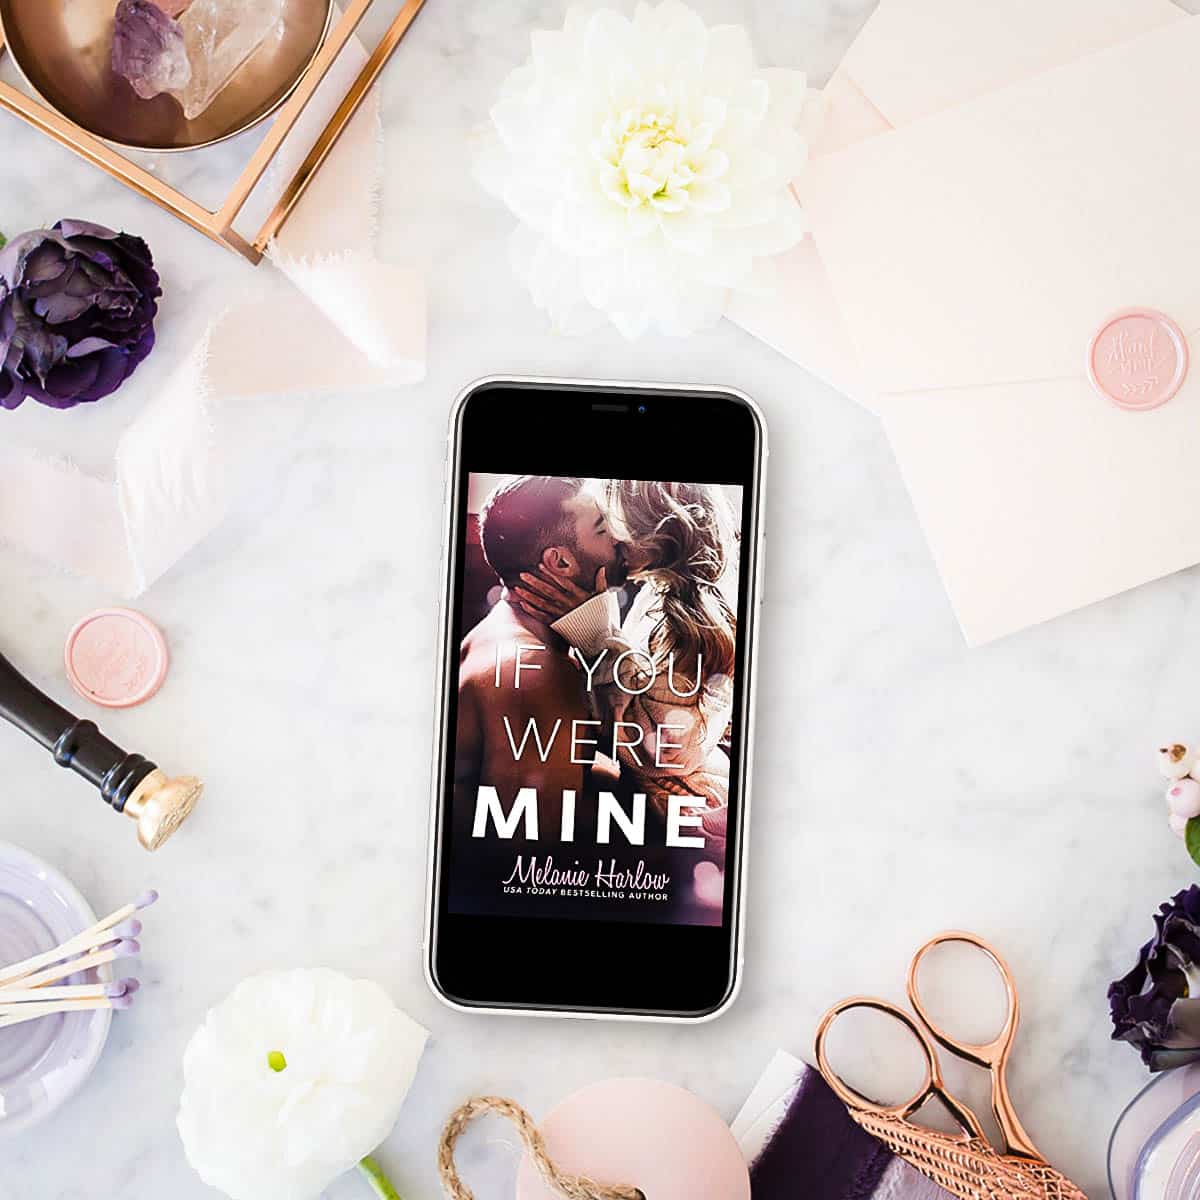 If You Were Mine by Melanie Harlow – After We Fall Book 3